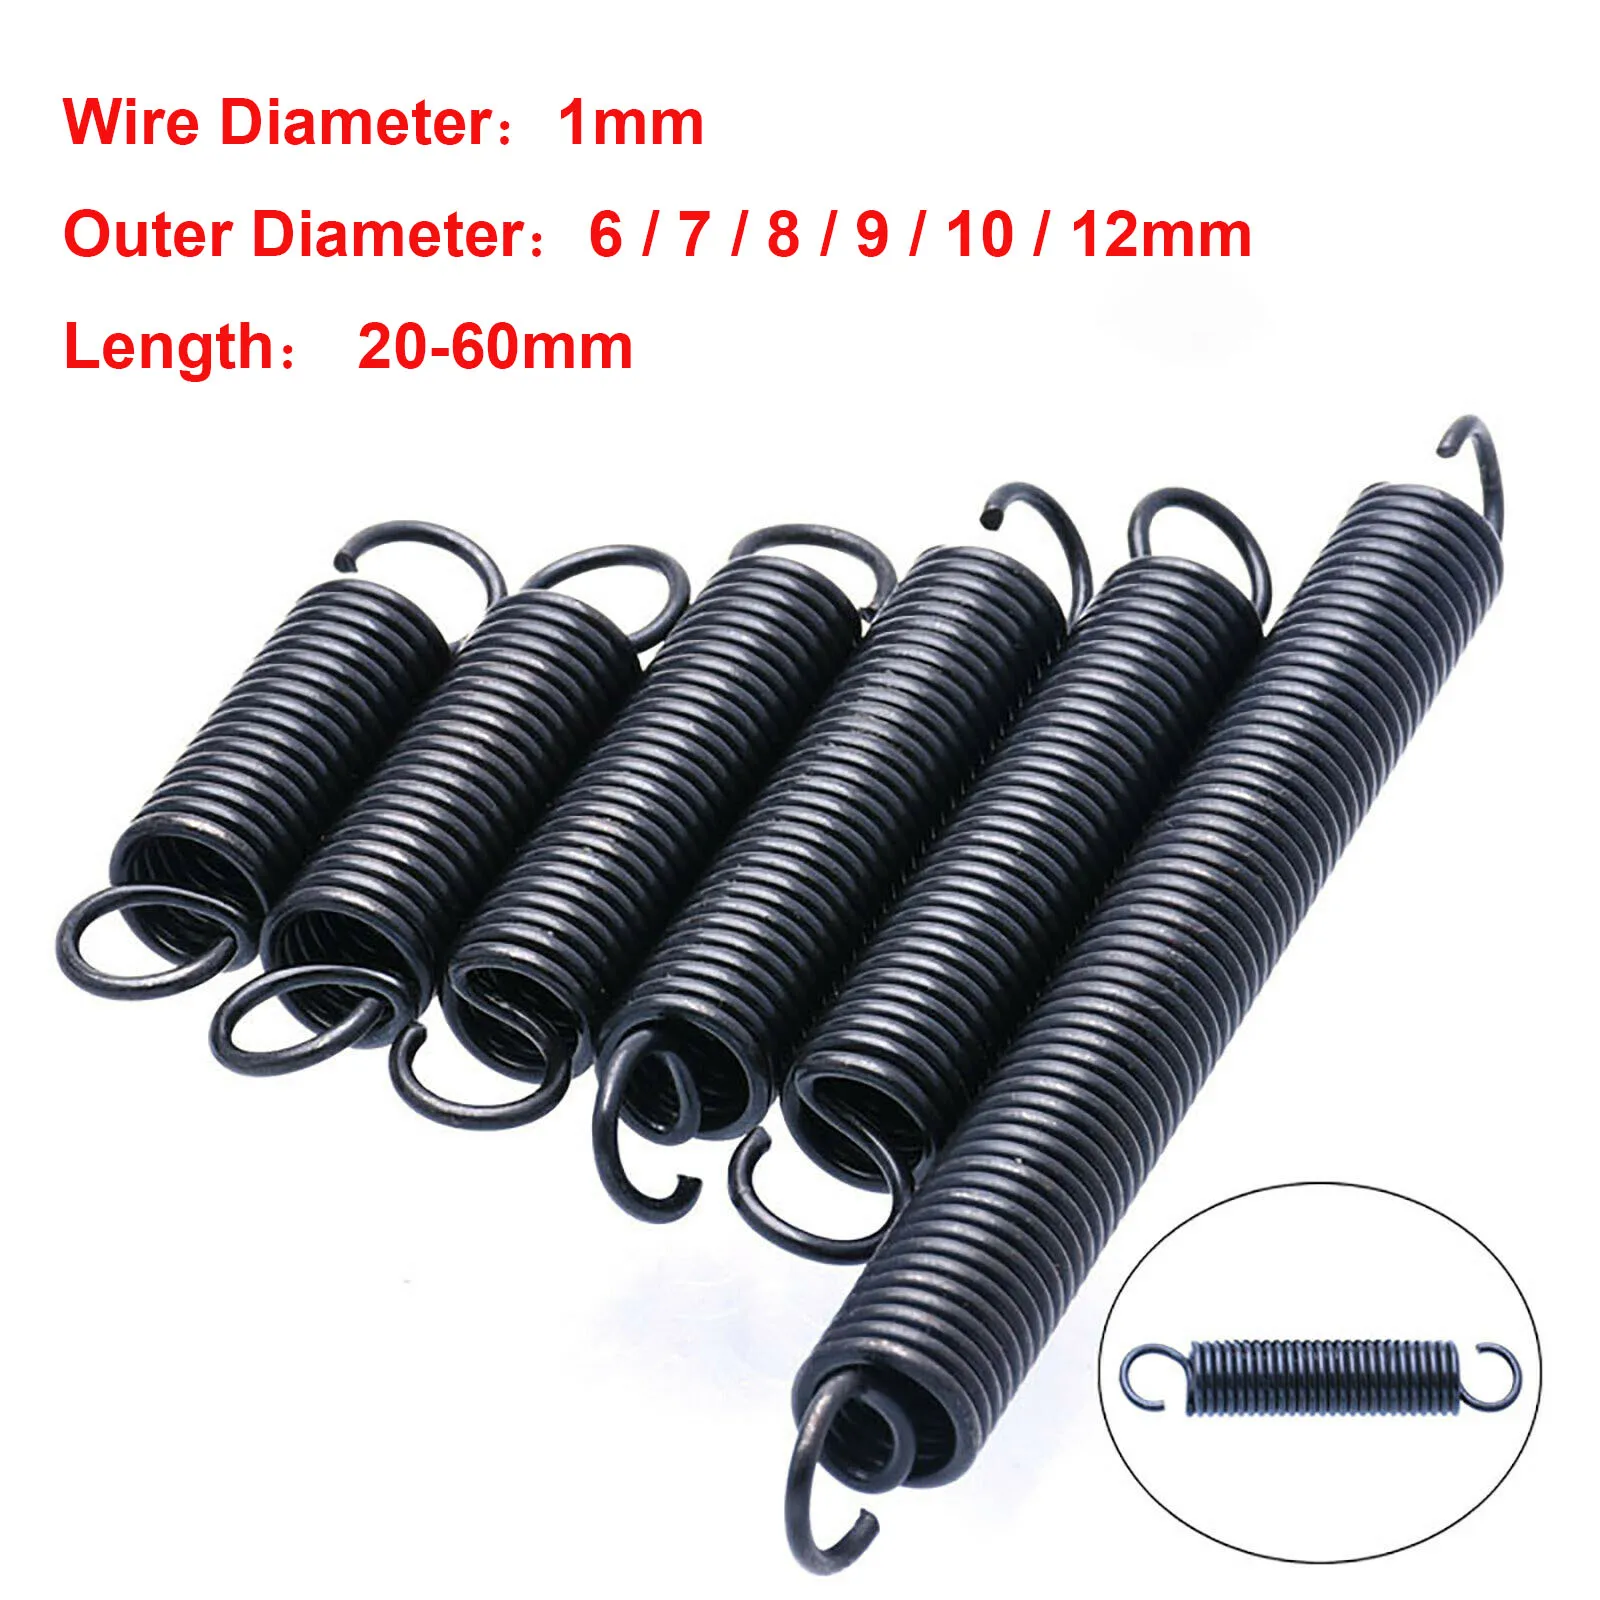 Extension Spring Wire Dia 1mm Springs with Hook Tension Spring Stainless Steel 